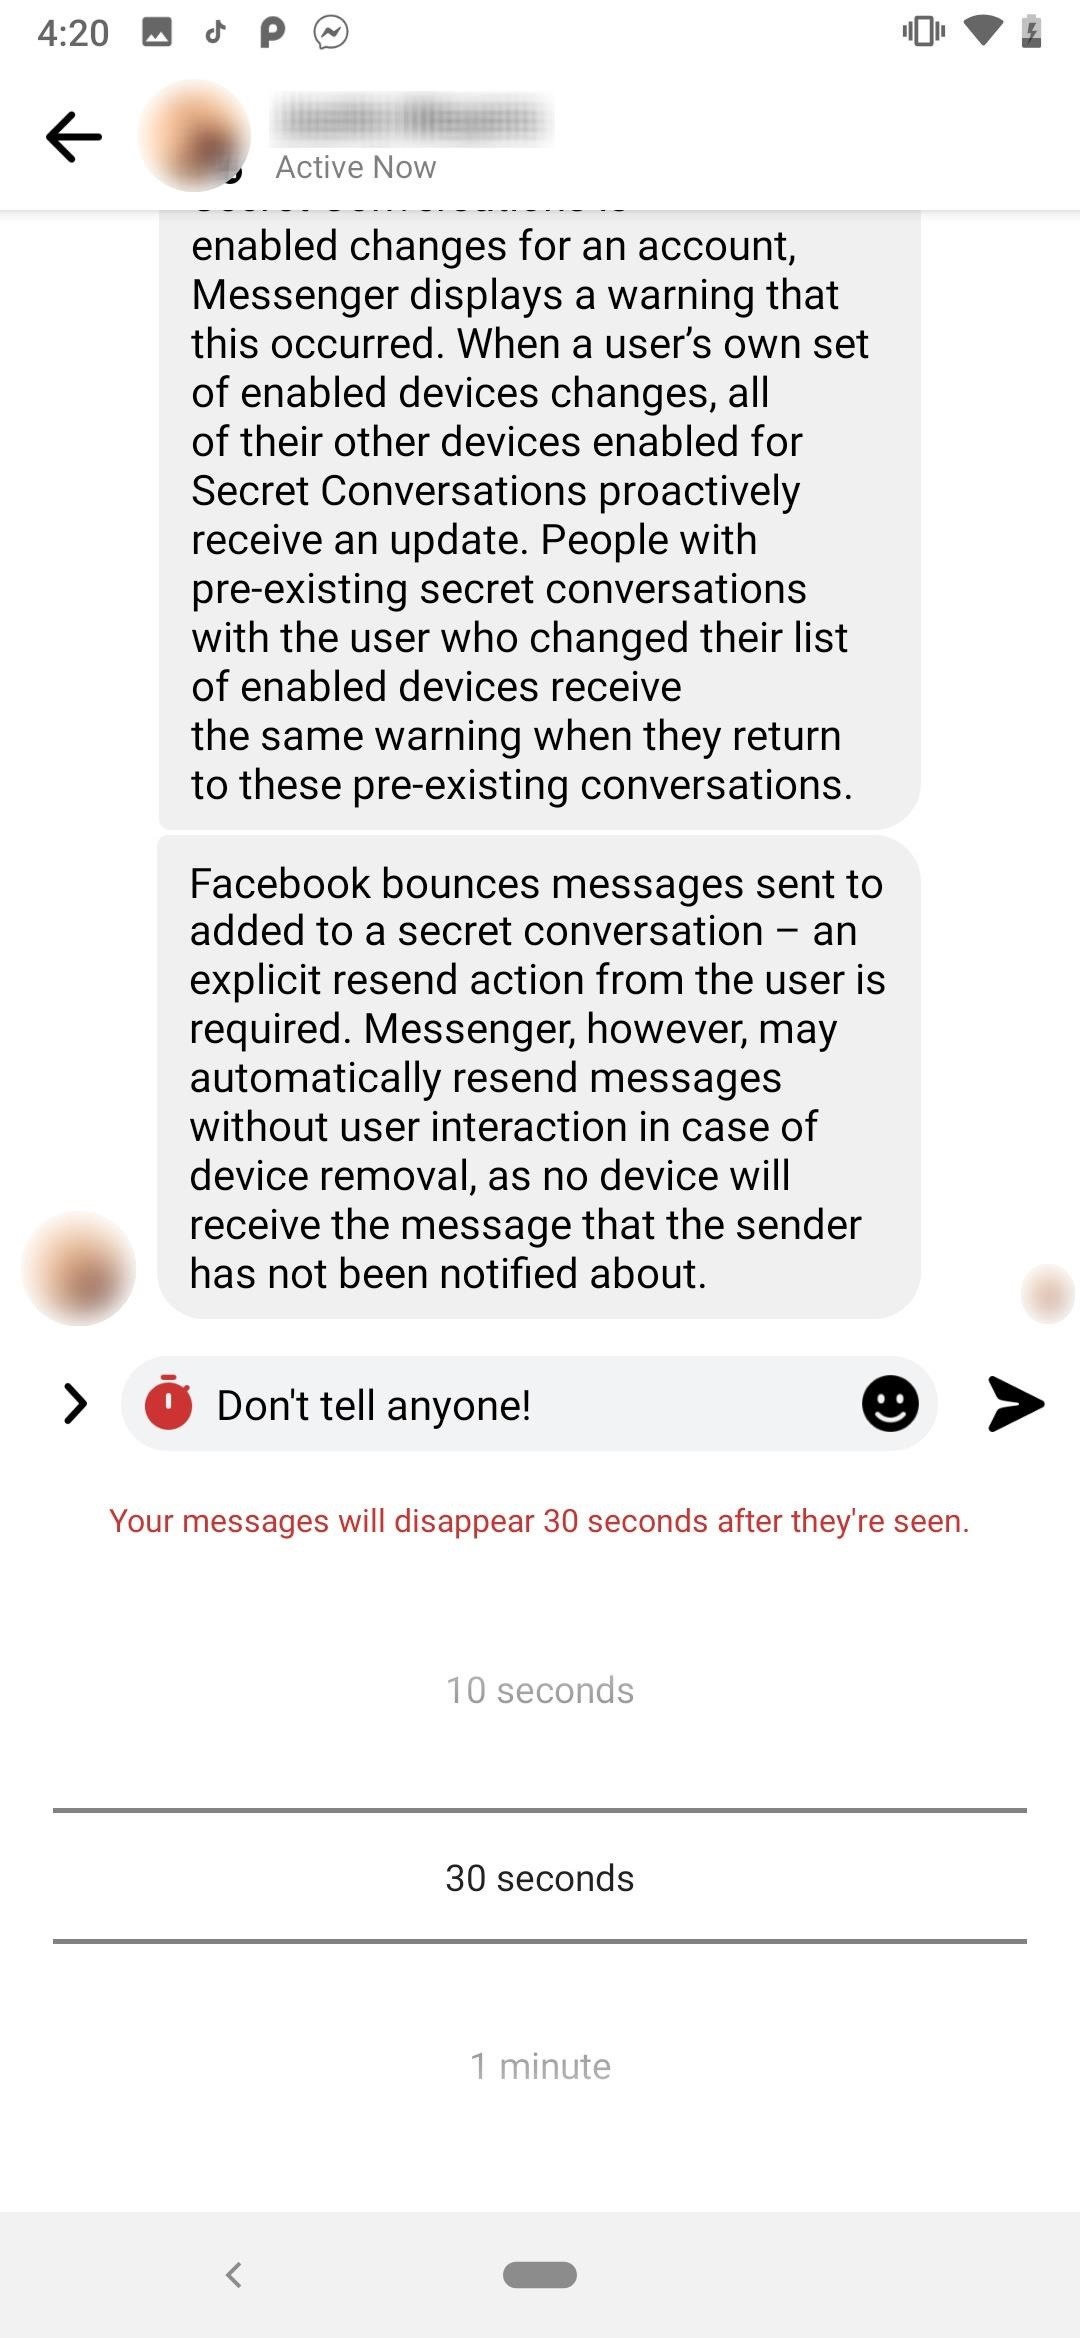 How to Chat with End-to-End Encryption Using Facebook Messenger's Secret Conversations